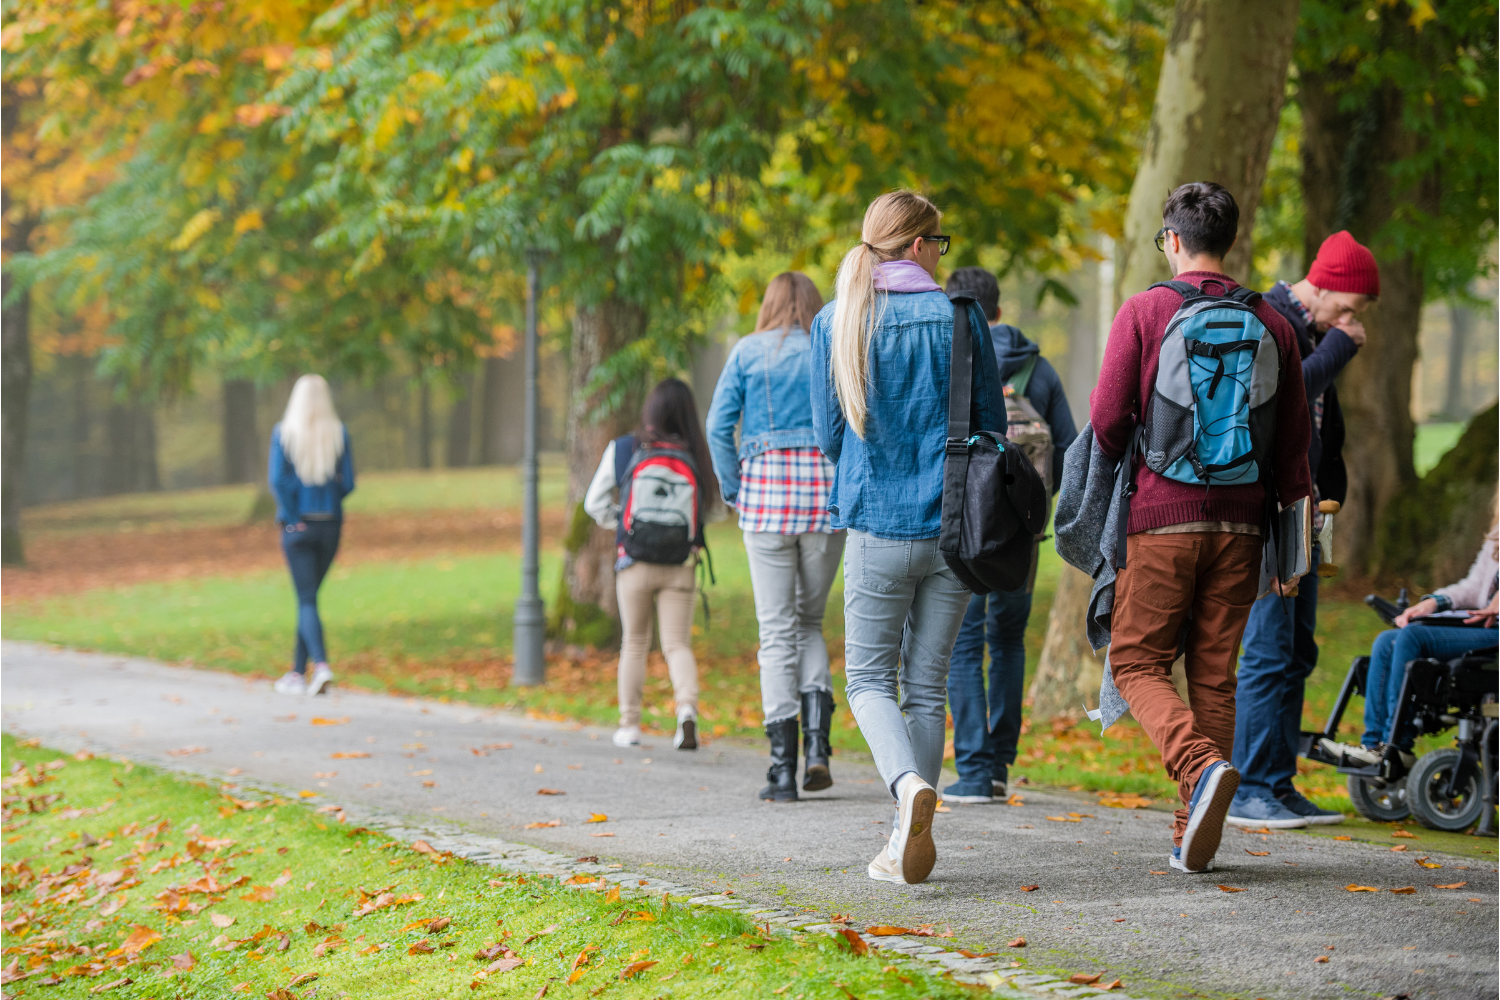 Image of students walking in a park